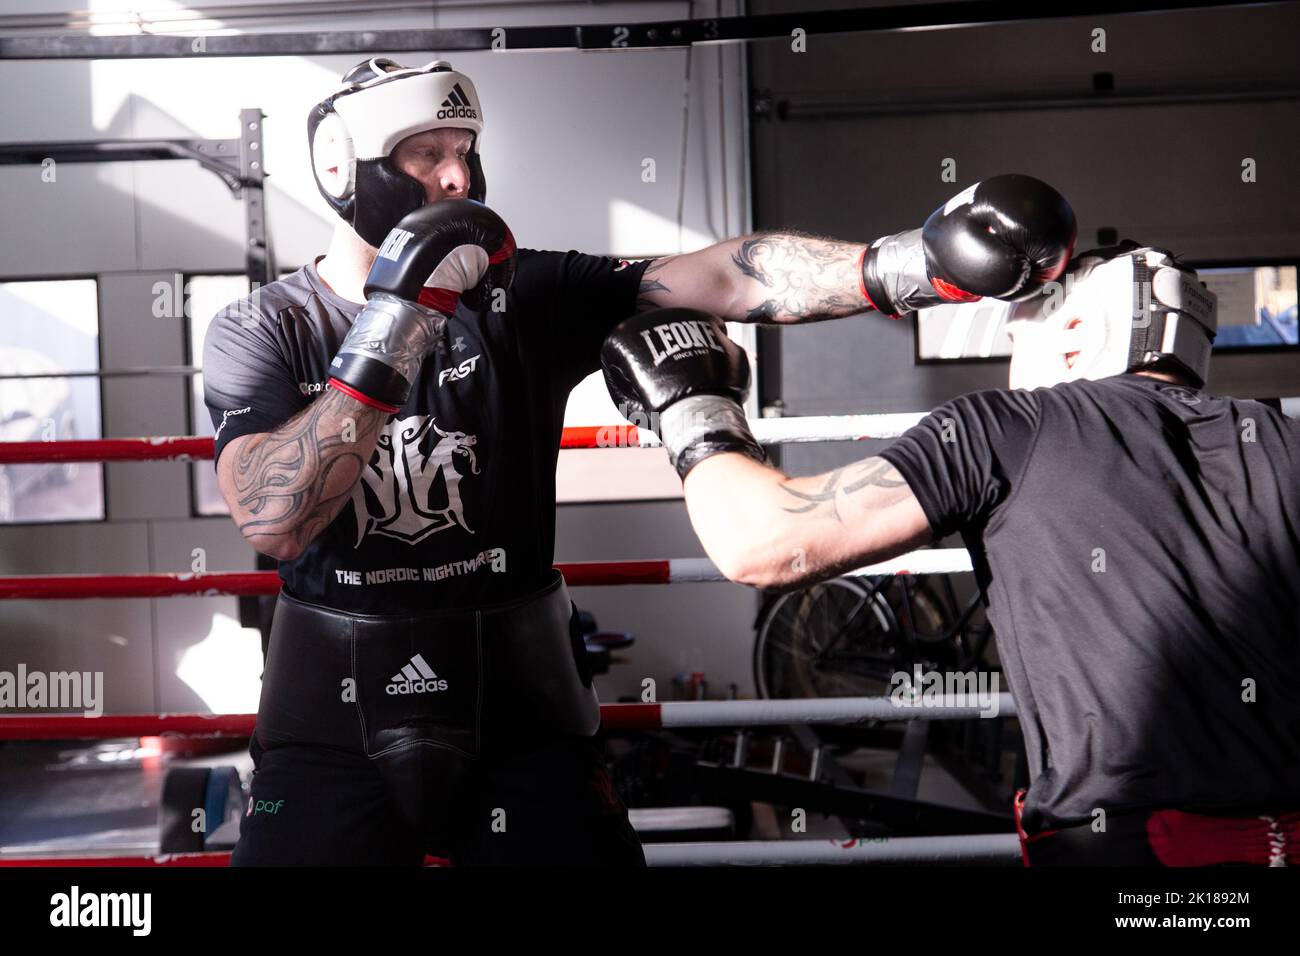 Finnish heavyweight Robert Helenius sparring at his training gym in  Mariehamn on Åland in Finland. Photograph: Rob Watkins/Alamy Stock Photo -  Alamy